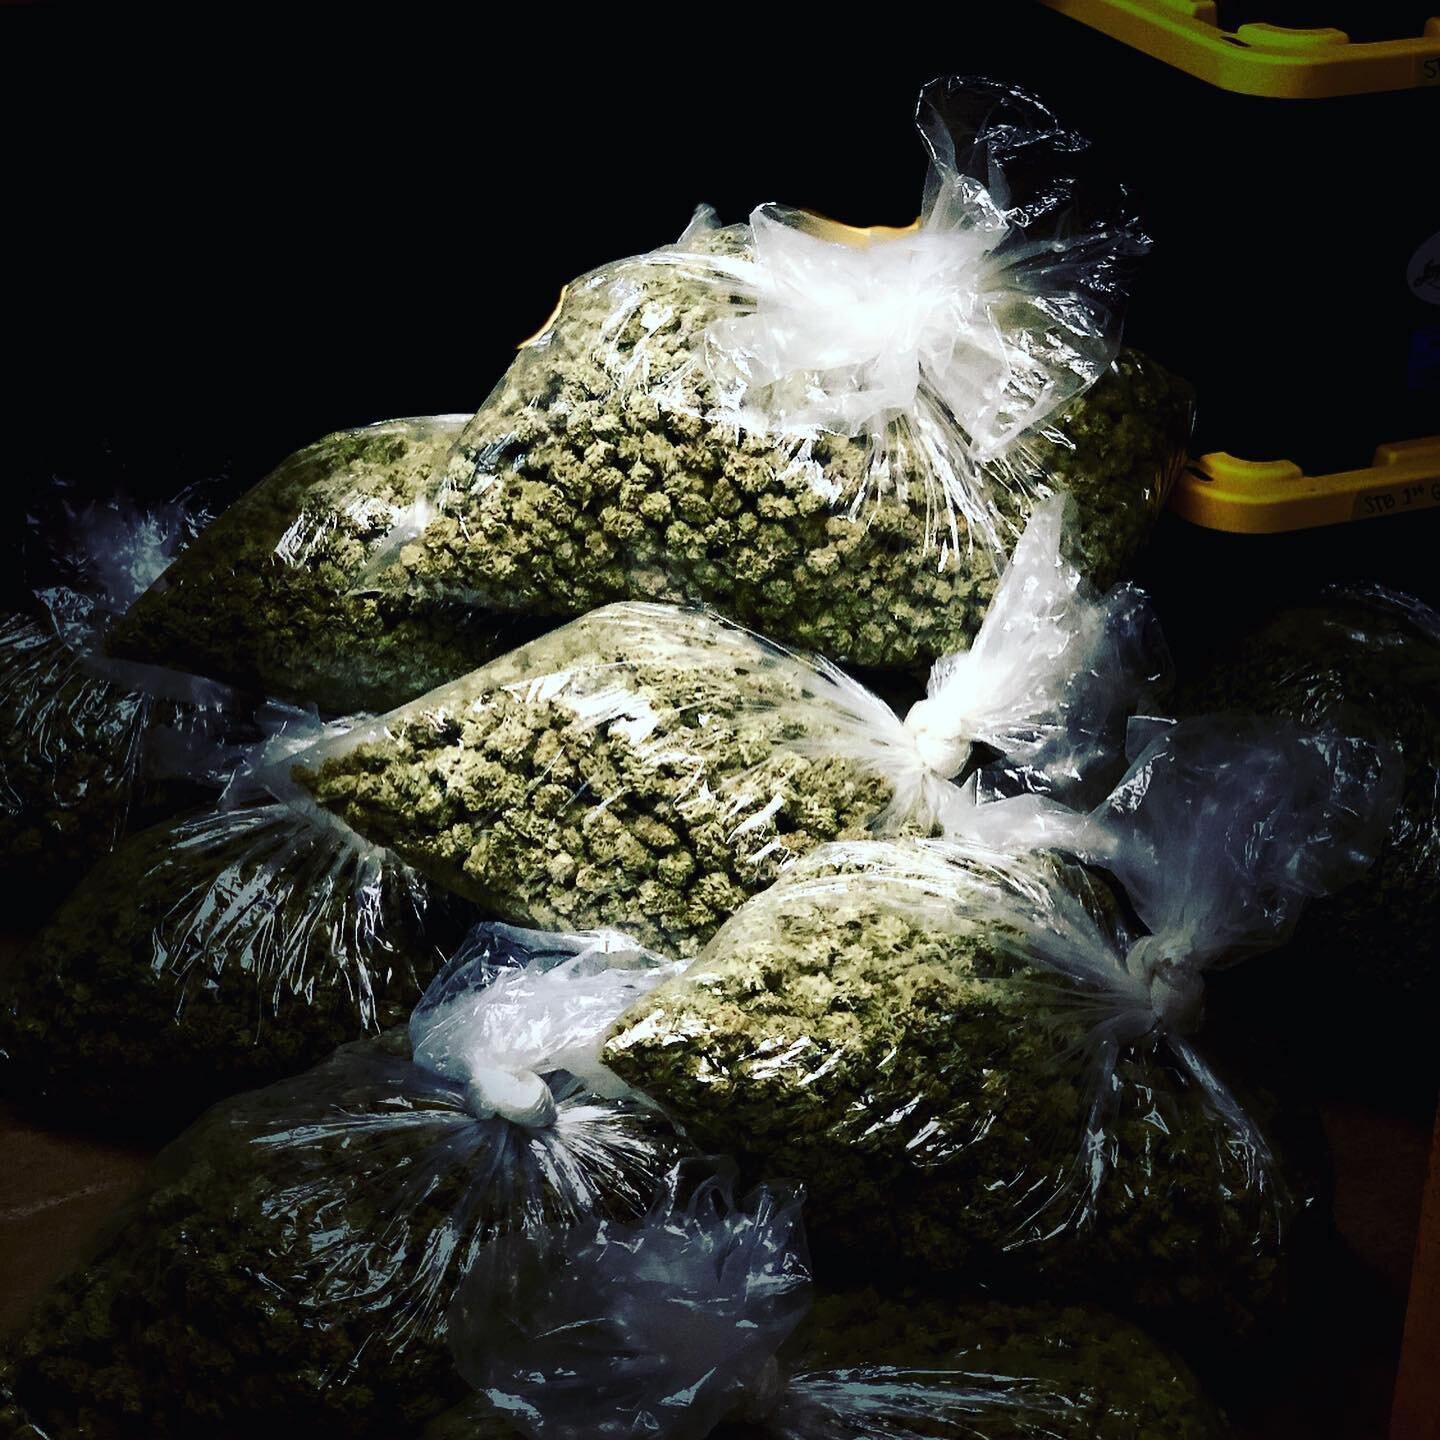 We hope everyone is staying safe out there in these crazy times. Best wishes to all from the joy ridge farms family. #family #cannabiscommunity #cannabis #cannabissociety #cannabisculture #canna #hightimes #highlife #pounds #weedporn #weed #weedlife 